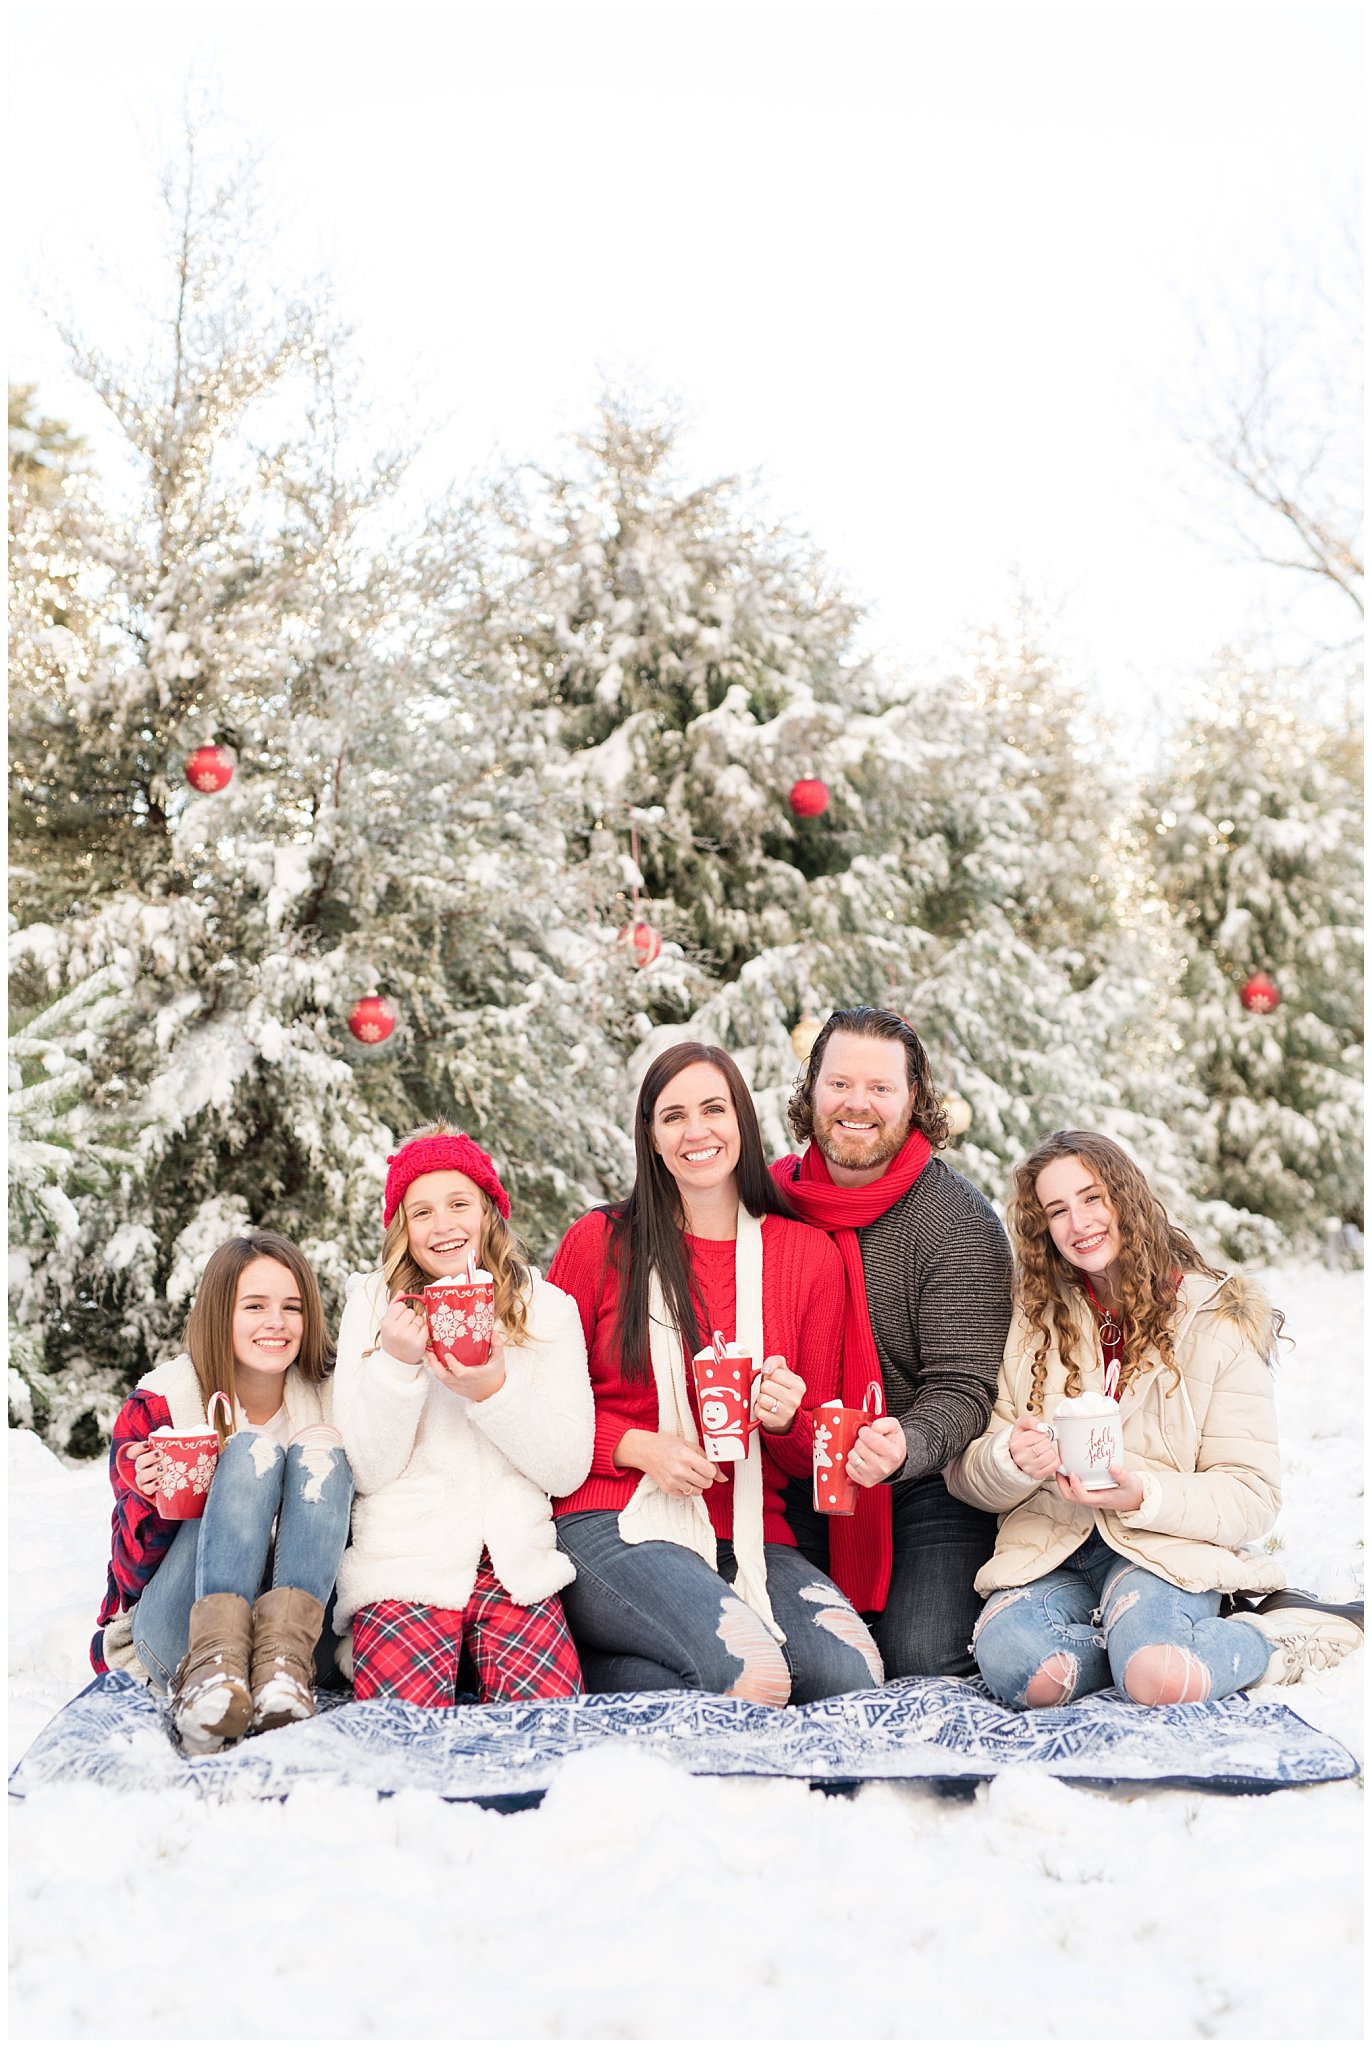 Family with hot chocolate cups in the snow | Utah Family Christmas Photoshoot | Oak Hills Reception and Event | Jessie and Dallin Photography